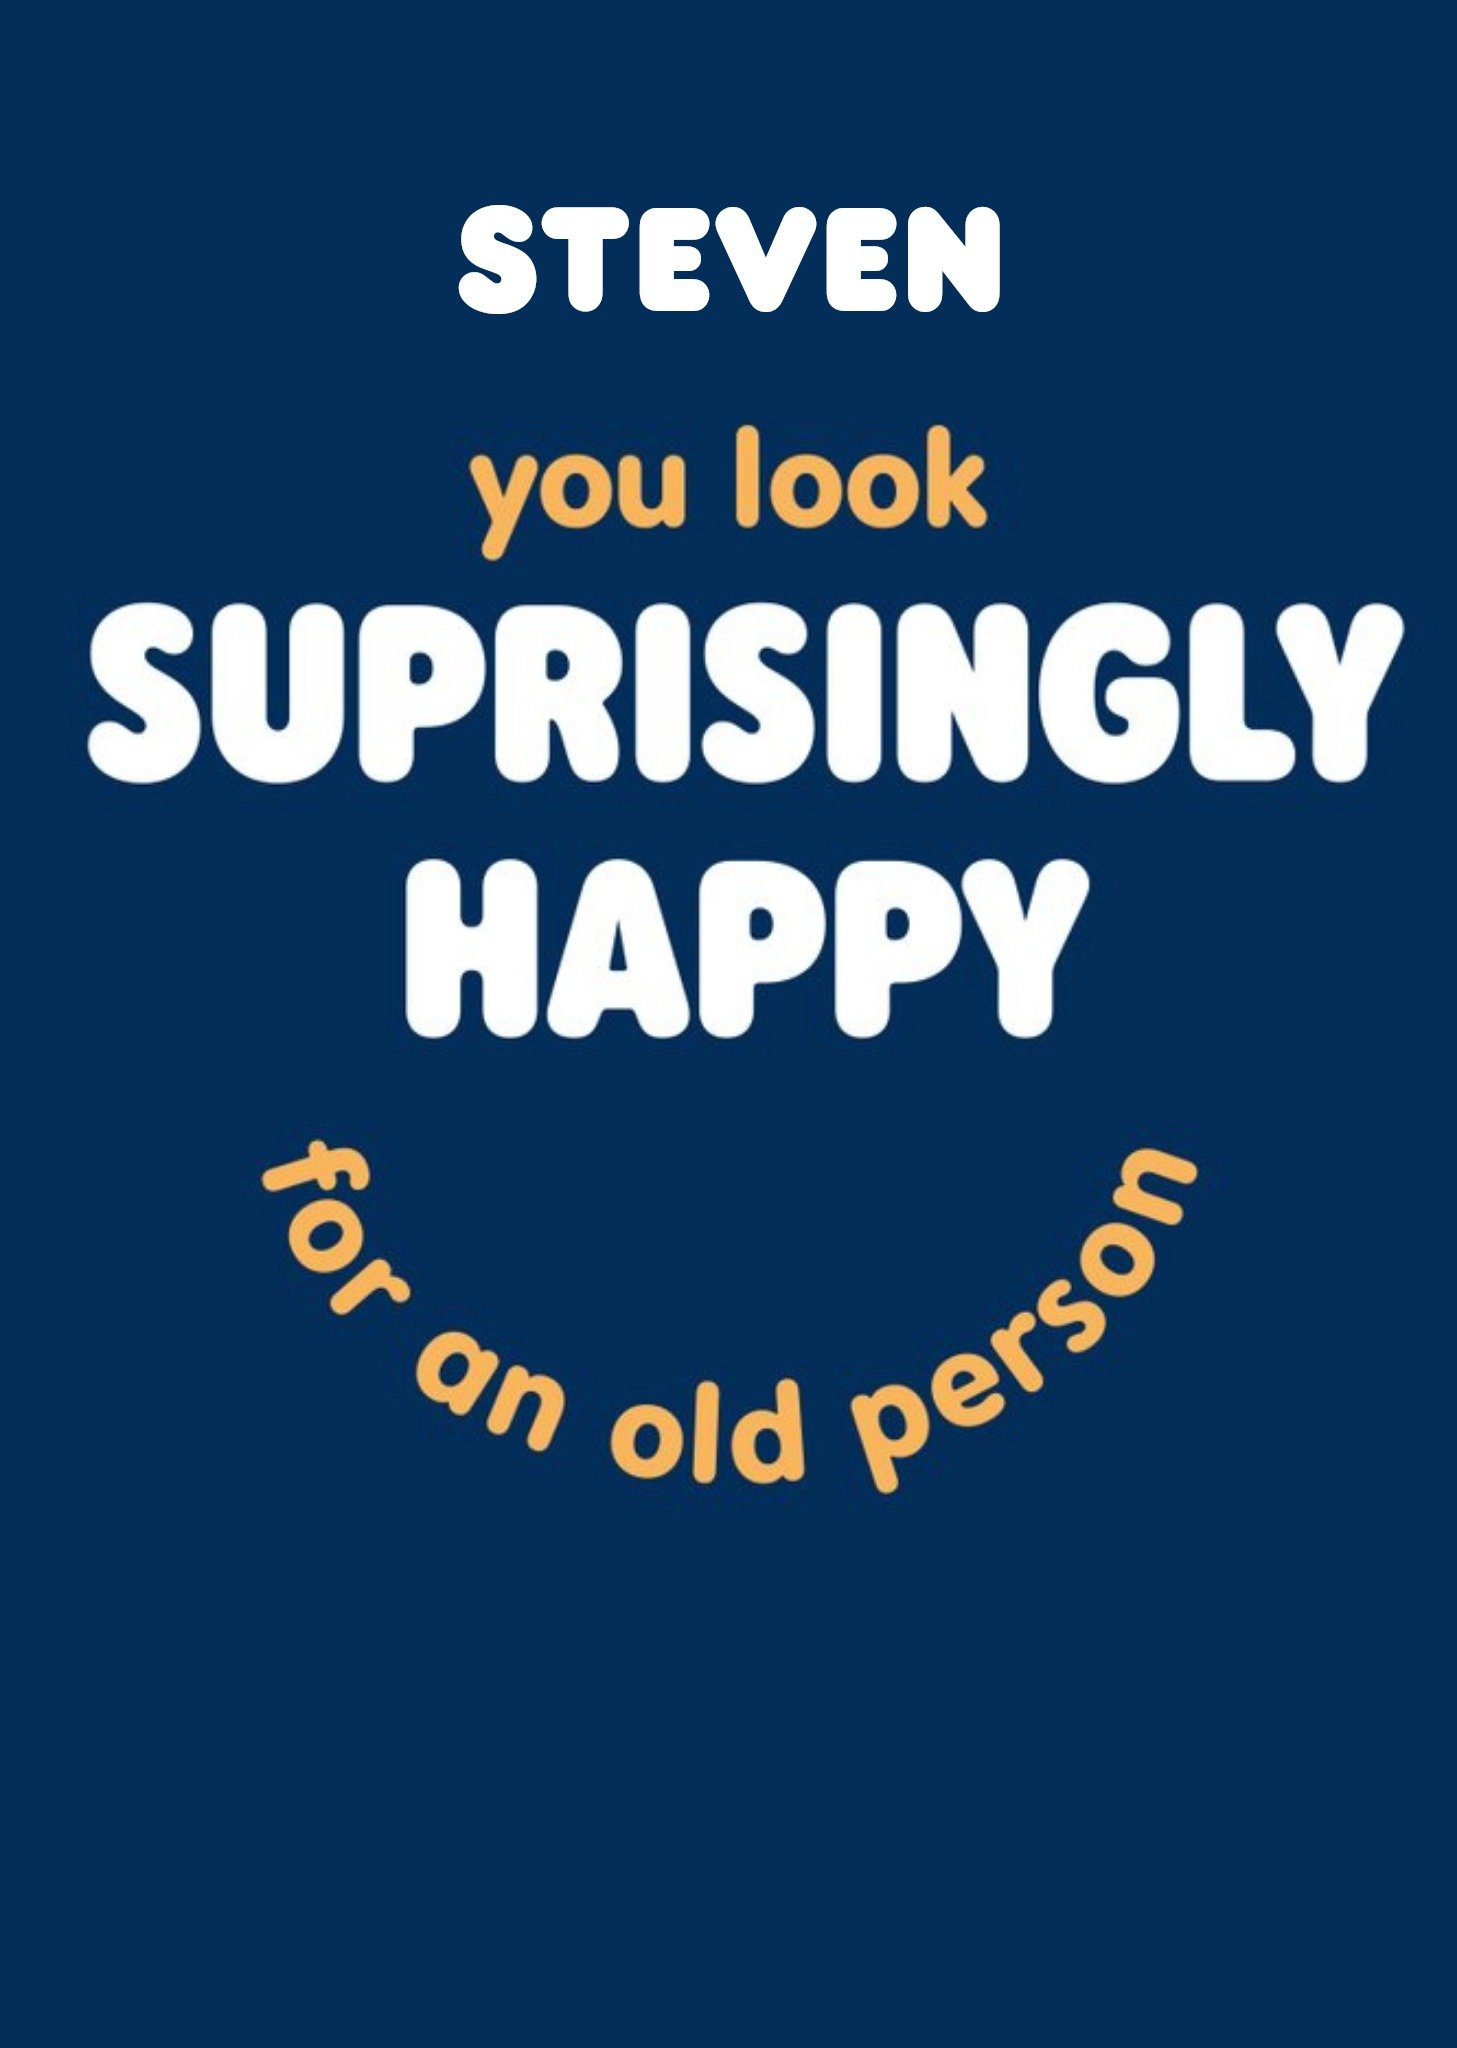 Moonpig Typographical Funny Suprisingly Happy For An Old Person Birthday Card Ecard